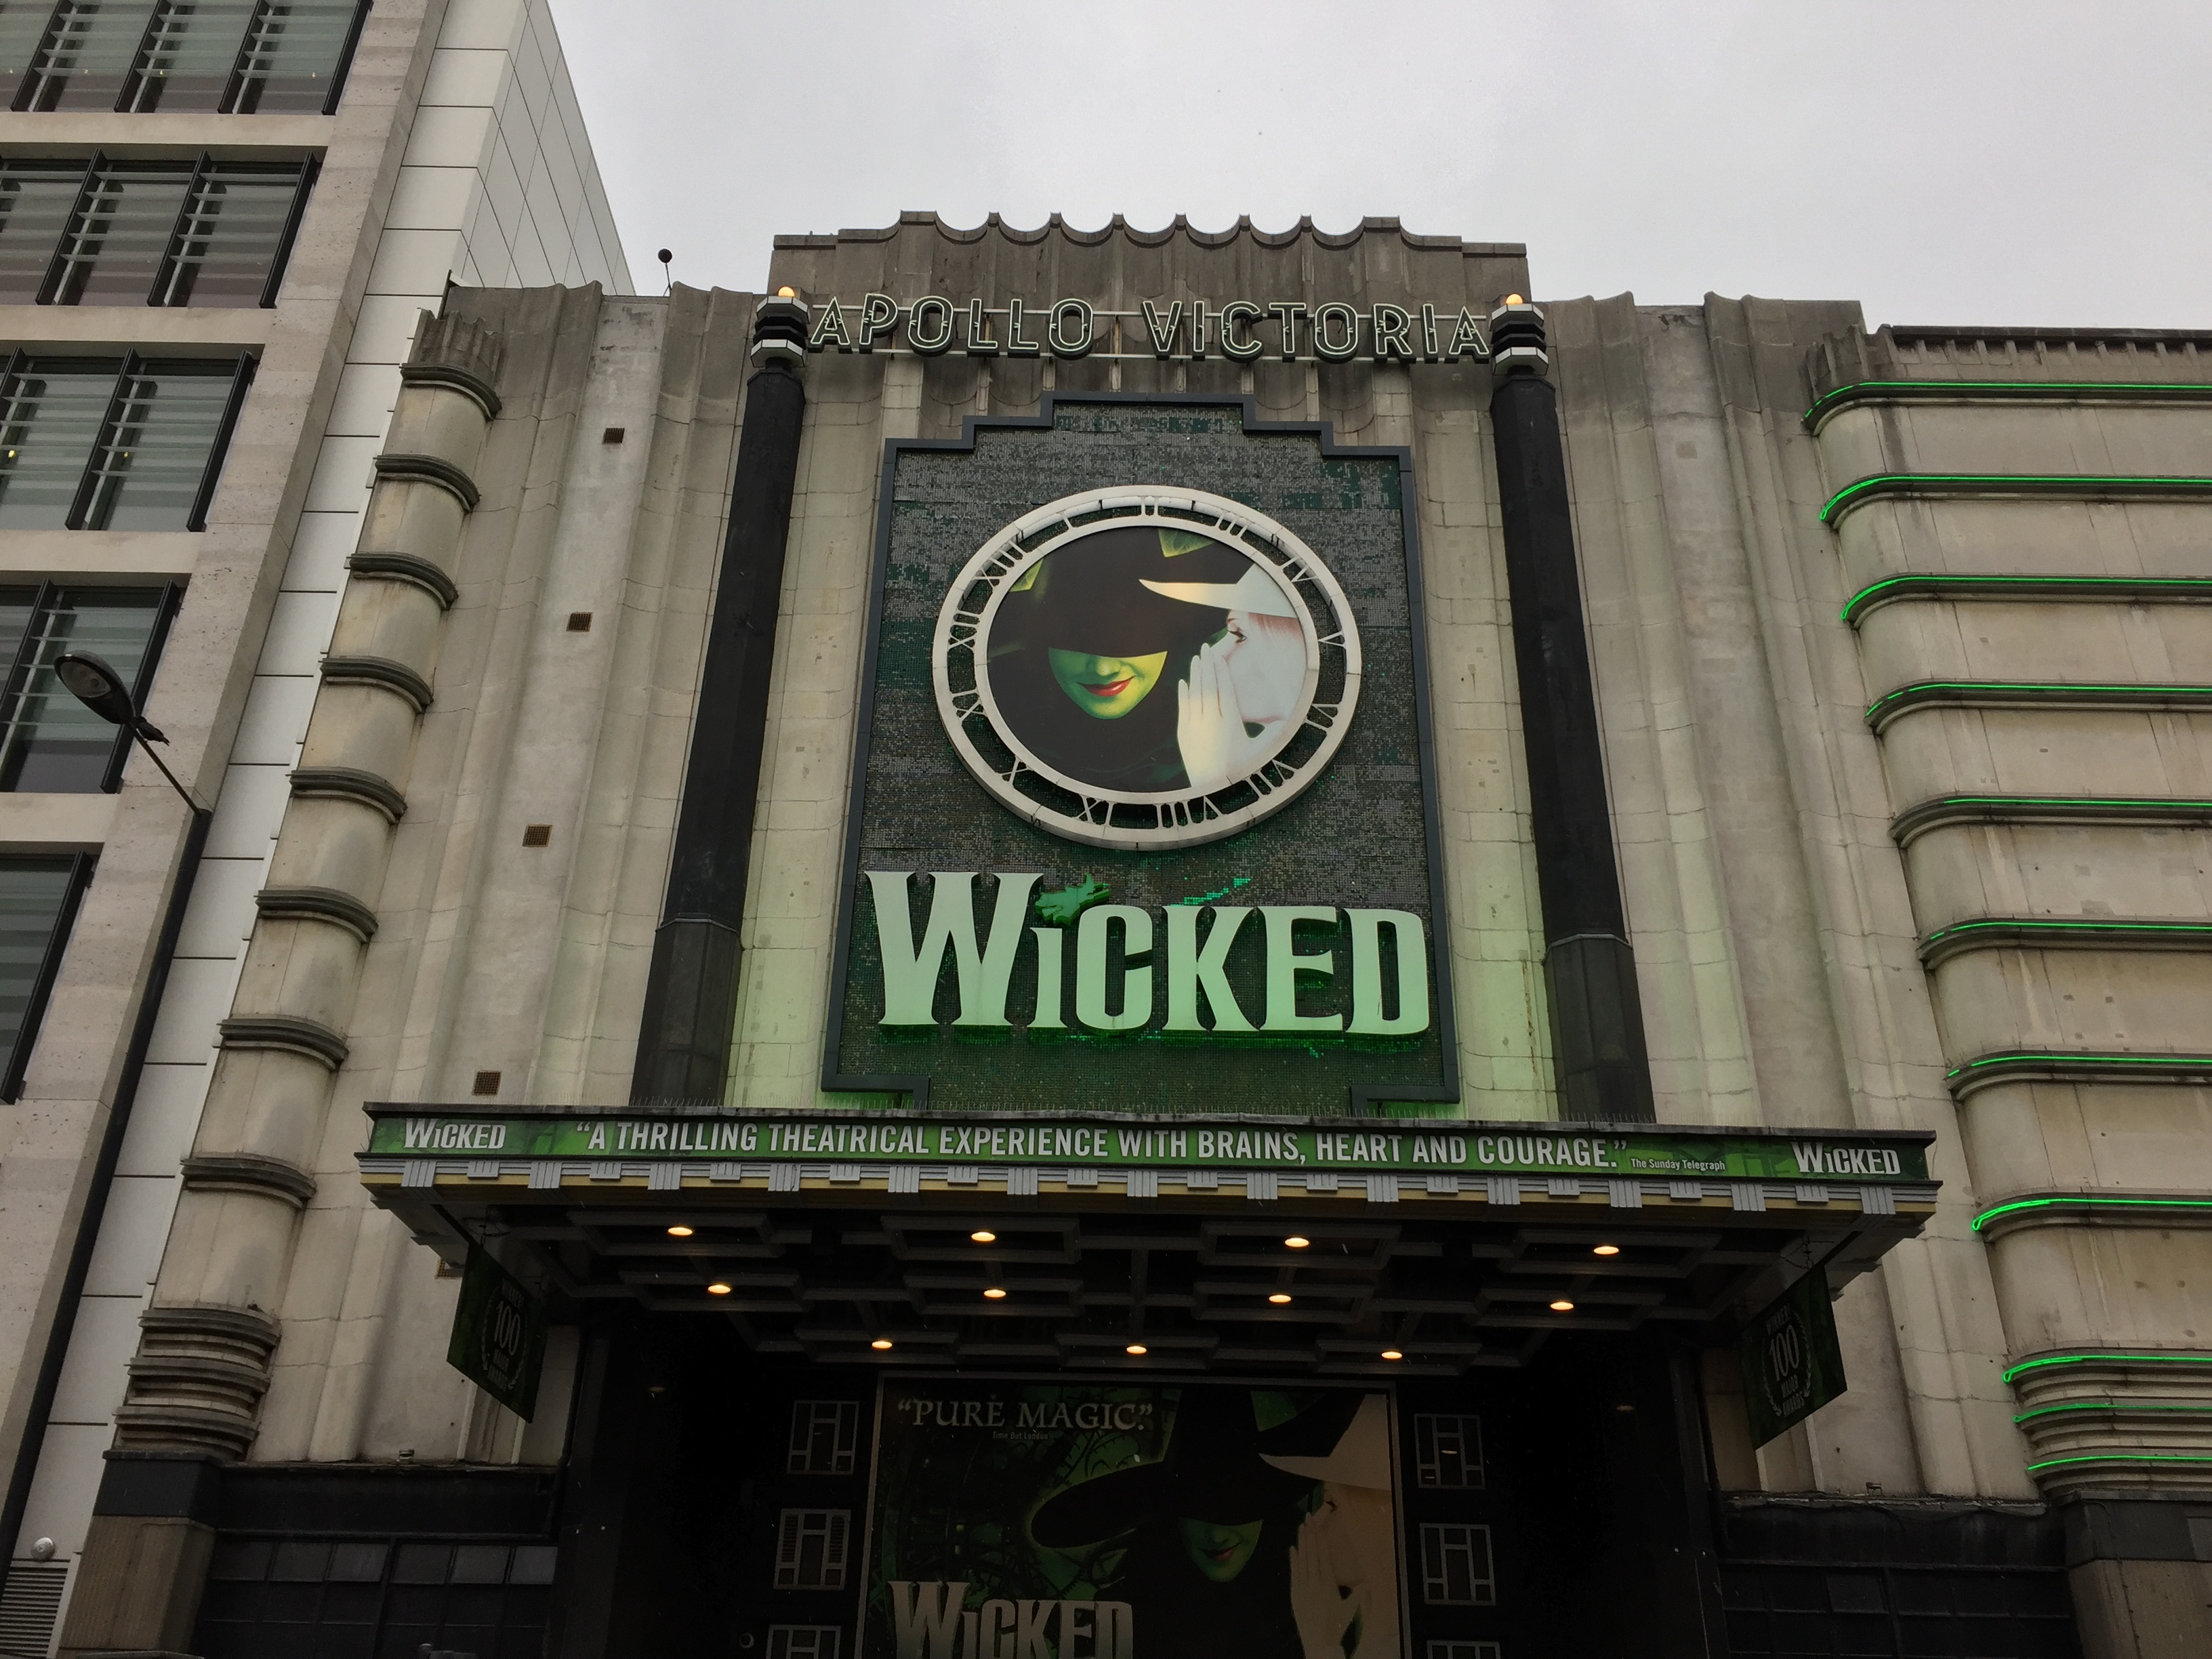 Wicked sign above the Apollo Victoria Theatre, with Elphaba, the green coloured Wicked Witch of the West, in the middle of a clock face, above the show's title in large letters. Along the front of the narrow canopy above the theatre entrance is white text on a green background, which reads: "Wicked - A thrilling theatrical experience with brains, heart and courage."